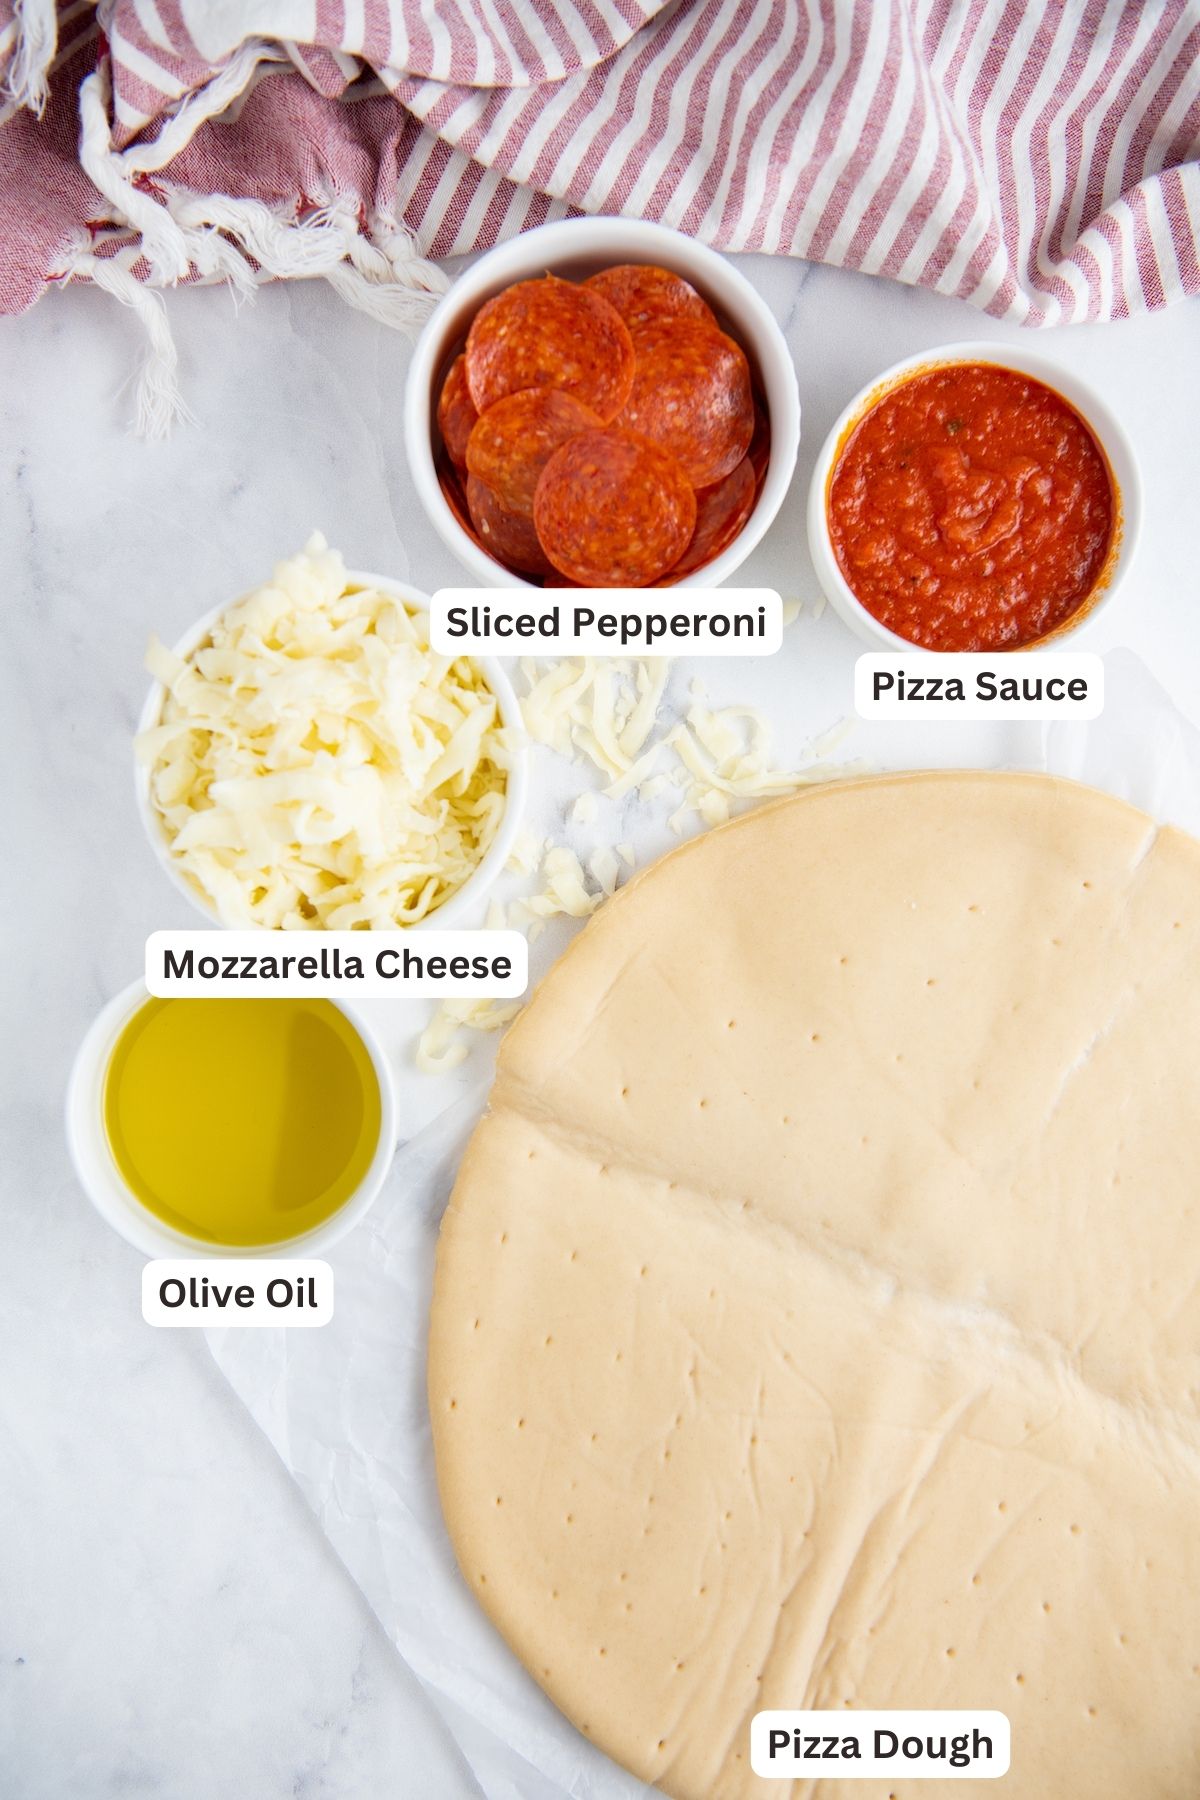 Ingredients for Cast Iron Pizza recipe.